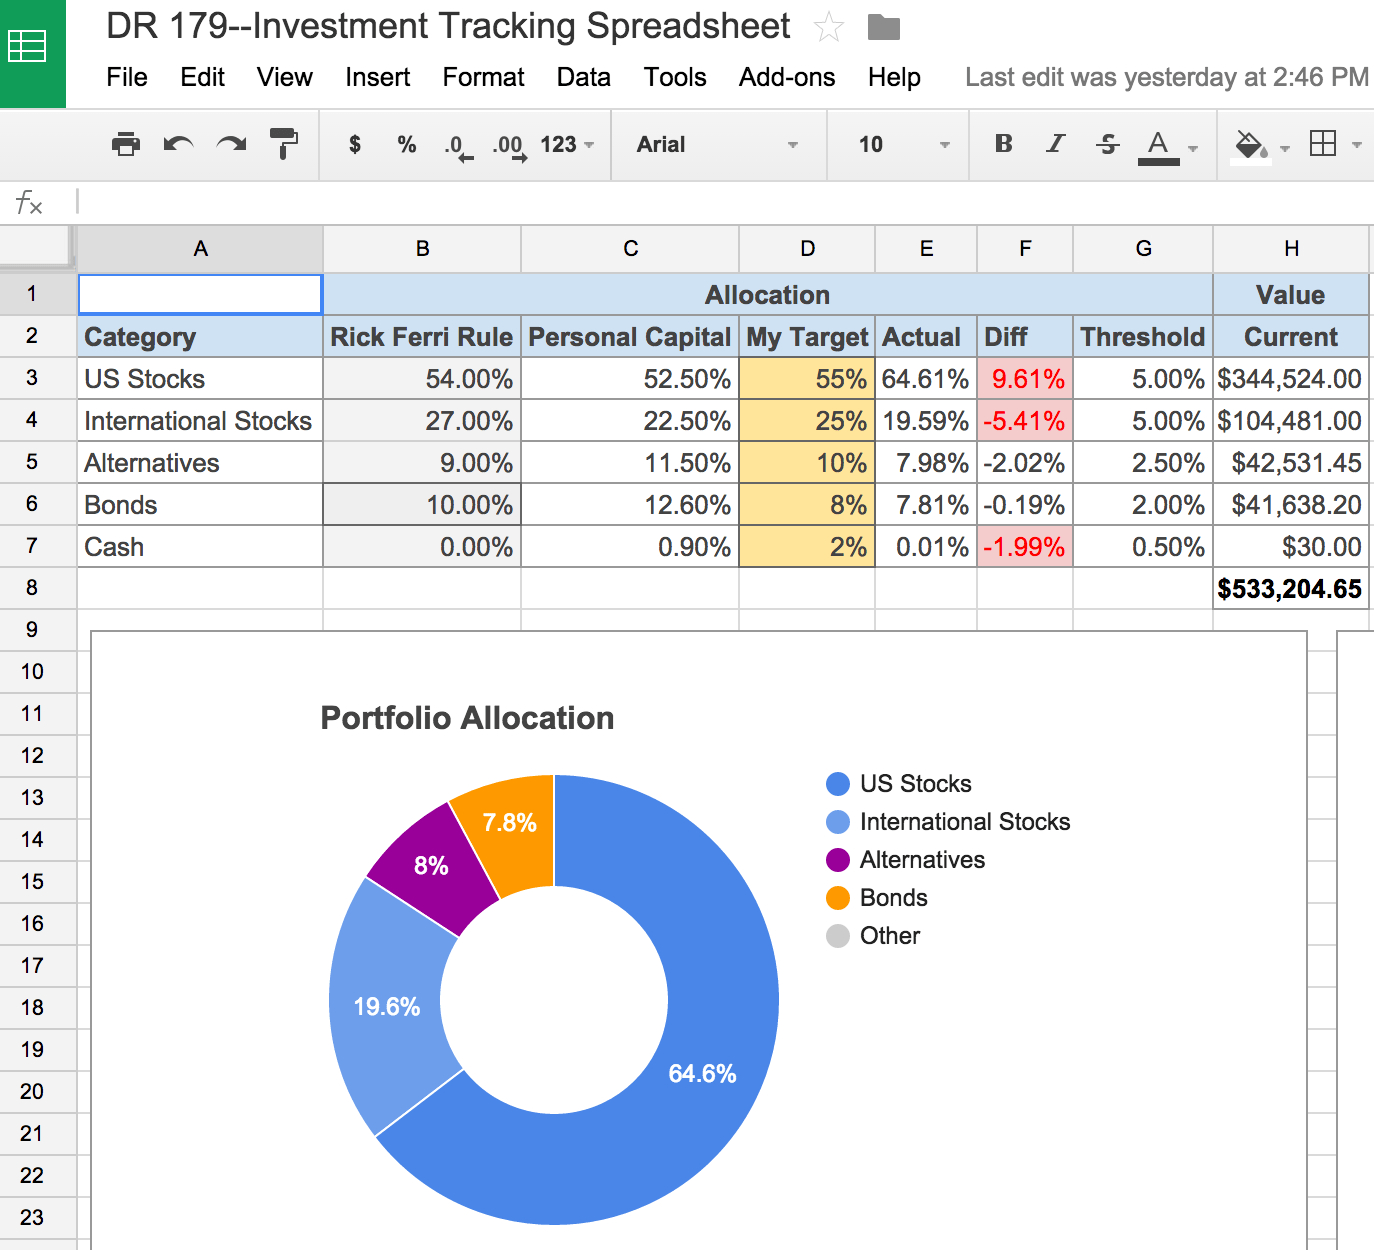 Portfolio Rebalancing Spreadsheet Intended For An Awesome And Free Investment Tracking Spreadsheet